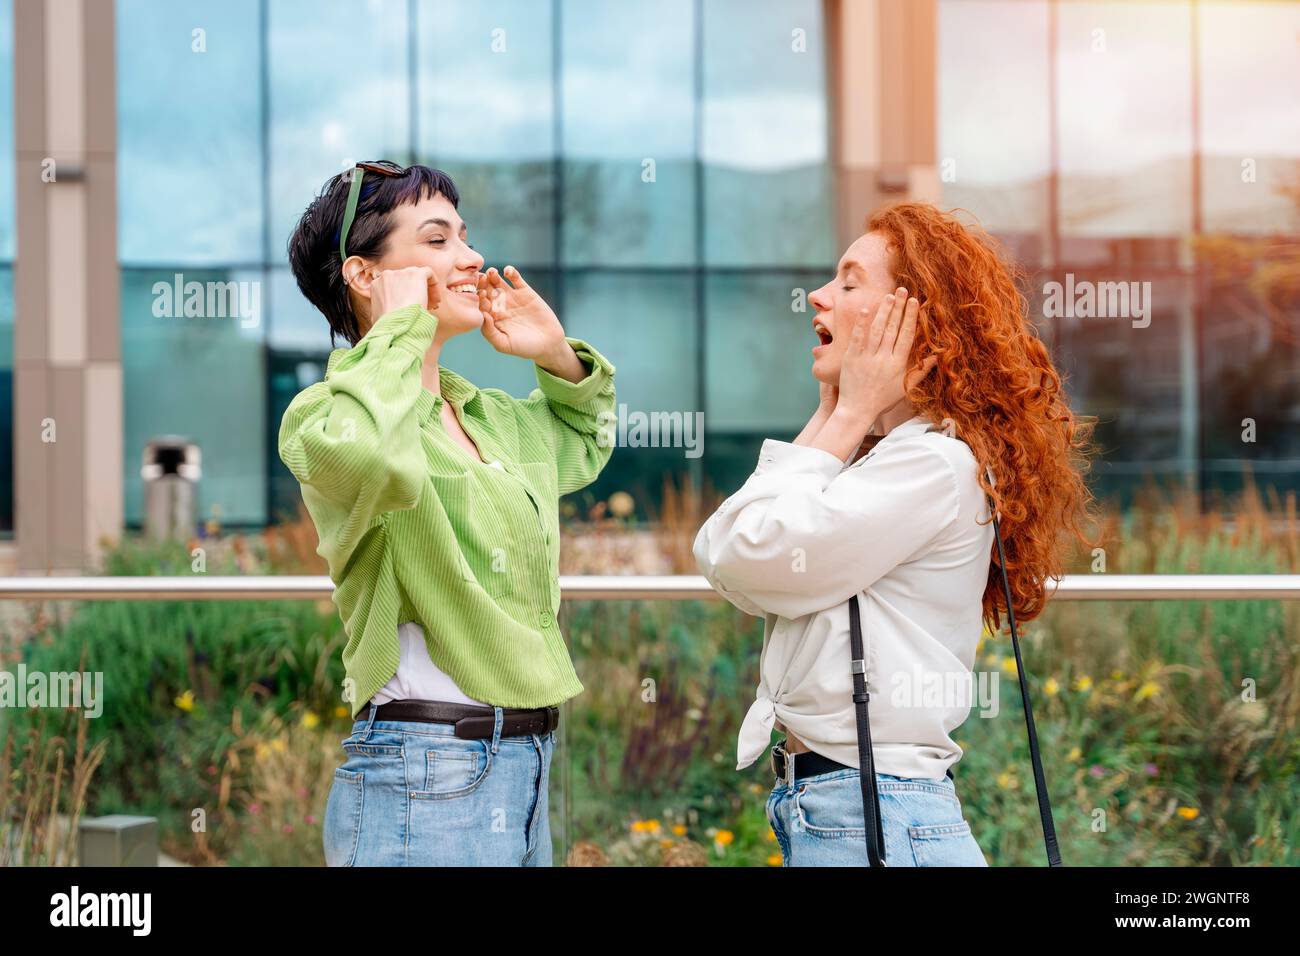 two girls covered their ears with their hands, screaming and do not want to listen to each other Stock Photo